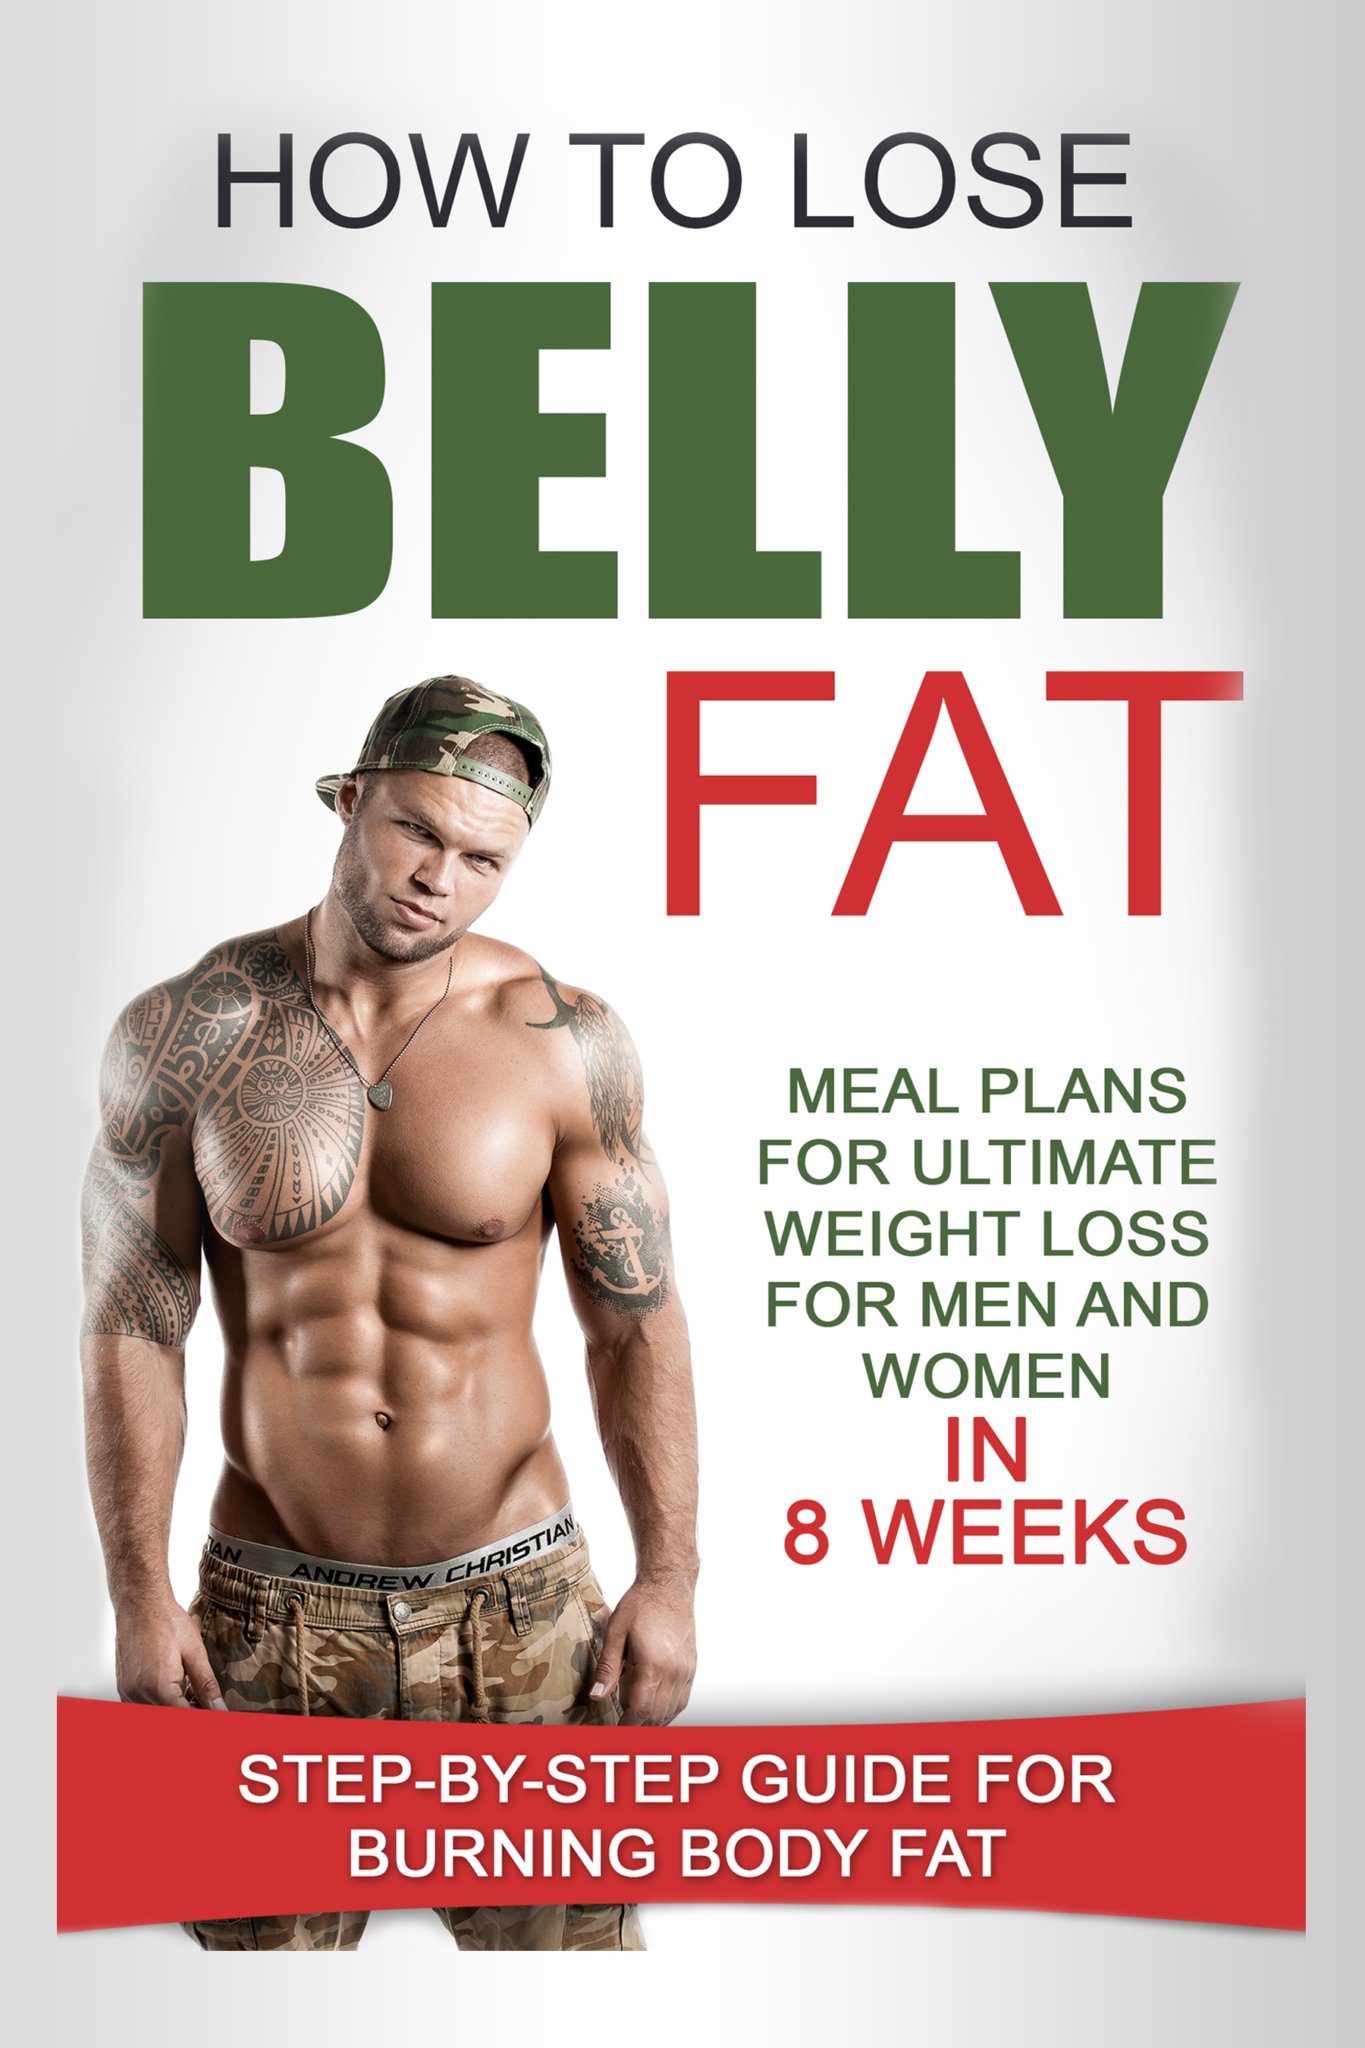 FREE: How to Lose Belly Fat: Meal Plans for Ultimate Weight Loss for Men and Women in 8 Weeks by Edward Cruz